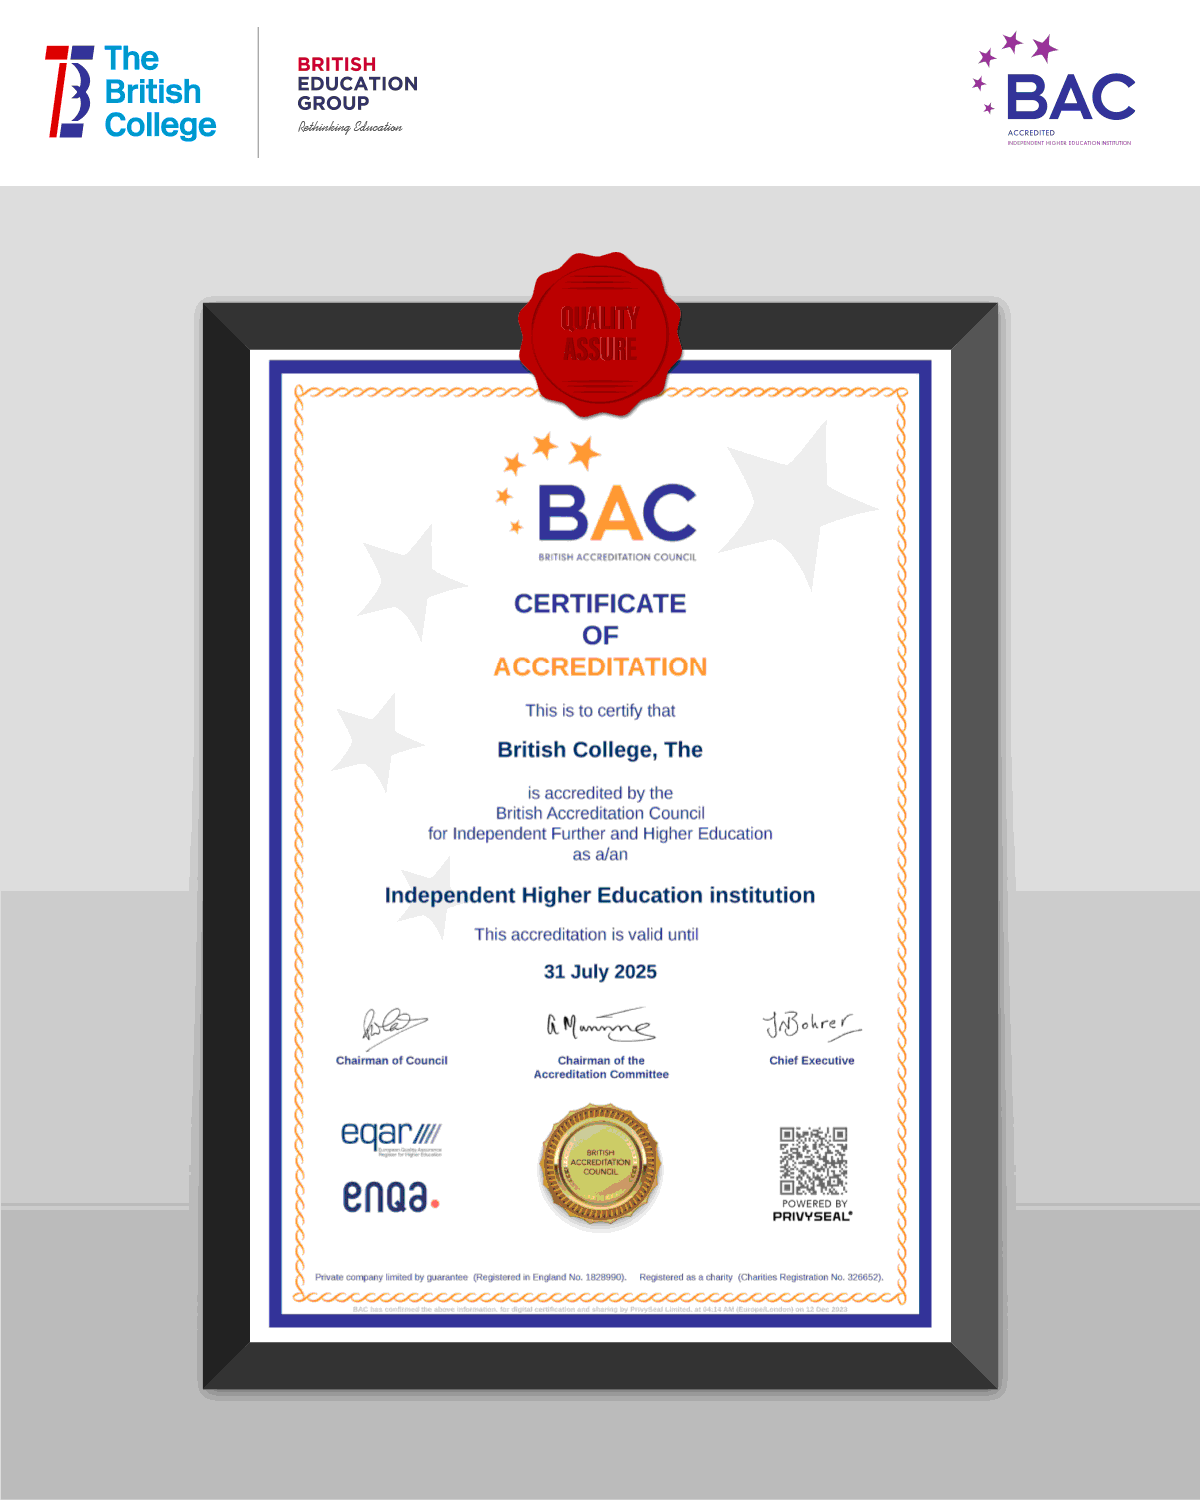 The British College is Accredited by the British Accreditation Council (BAC)